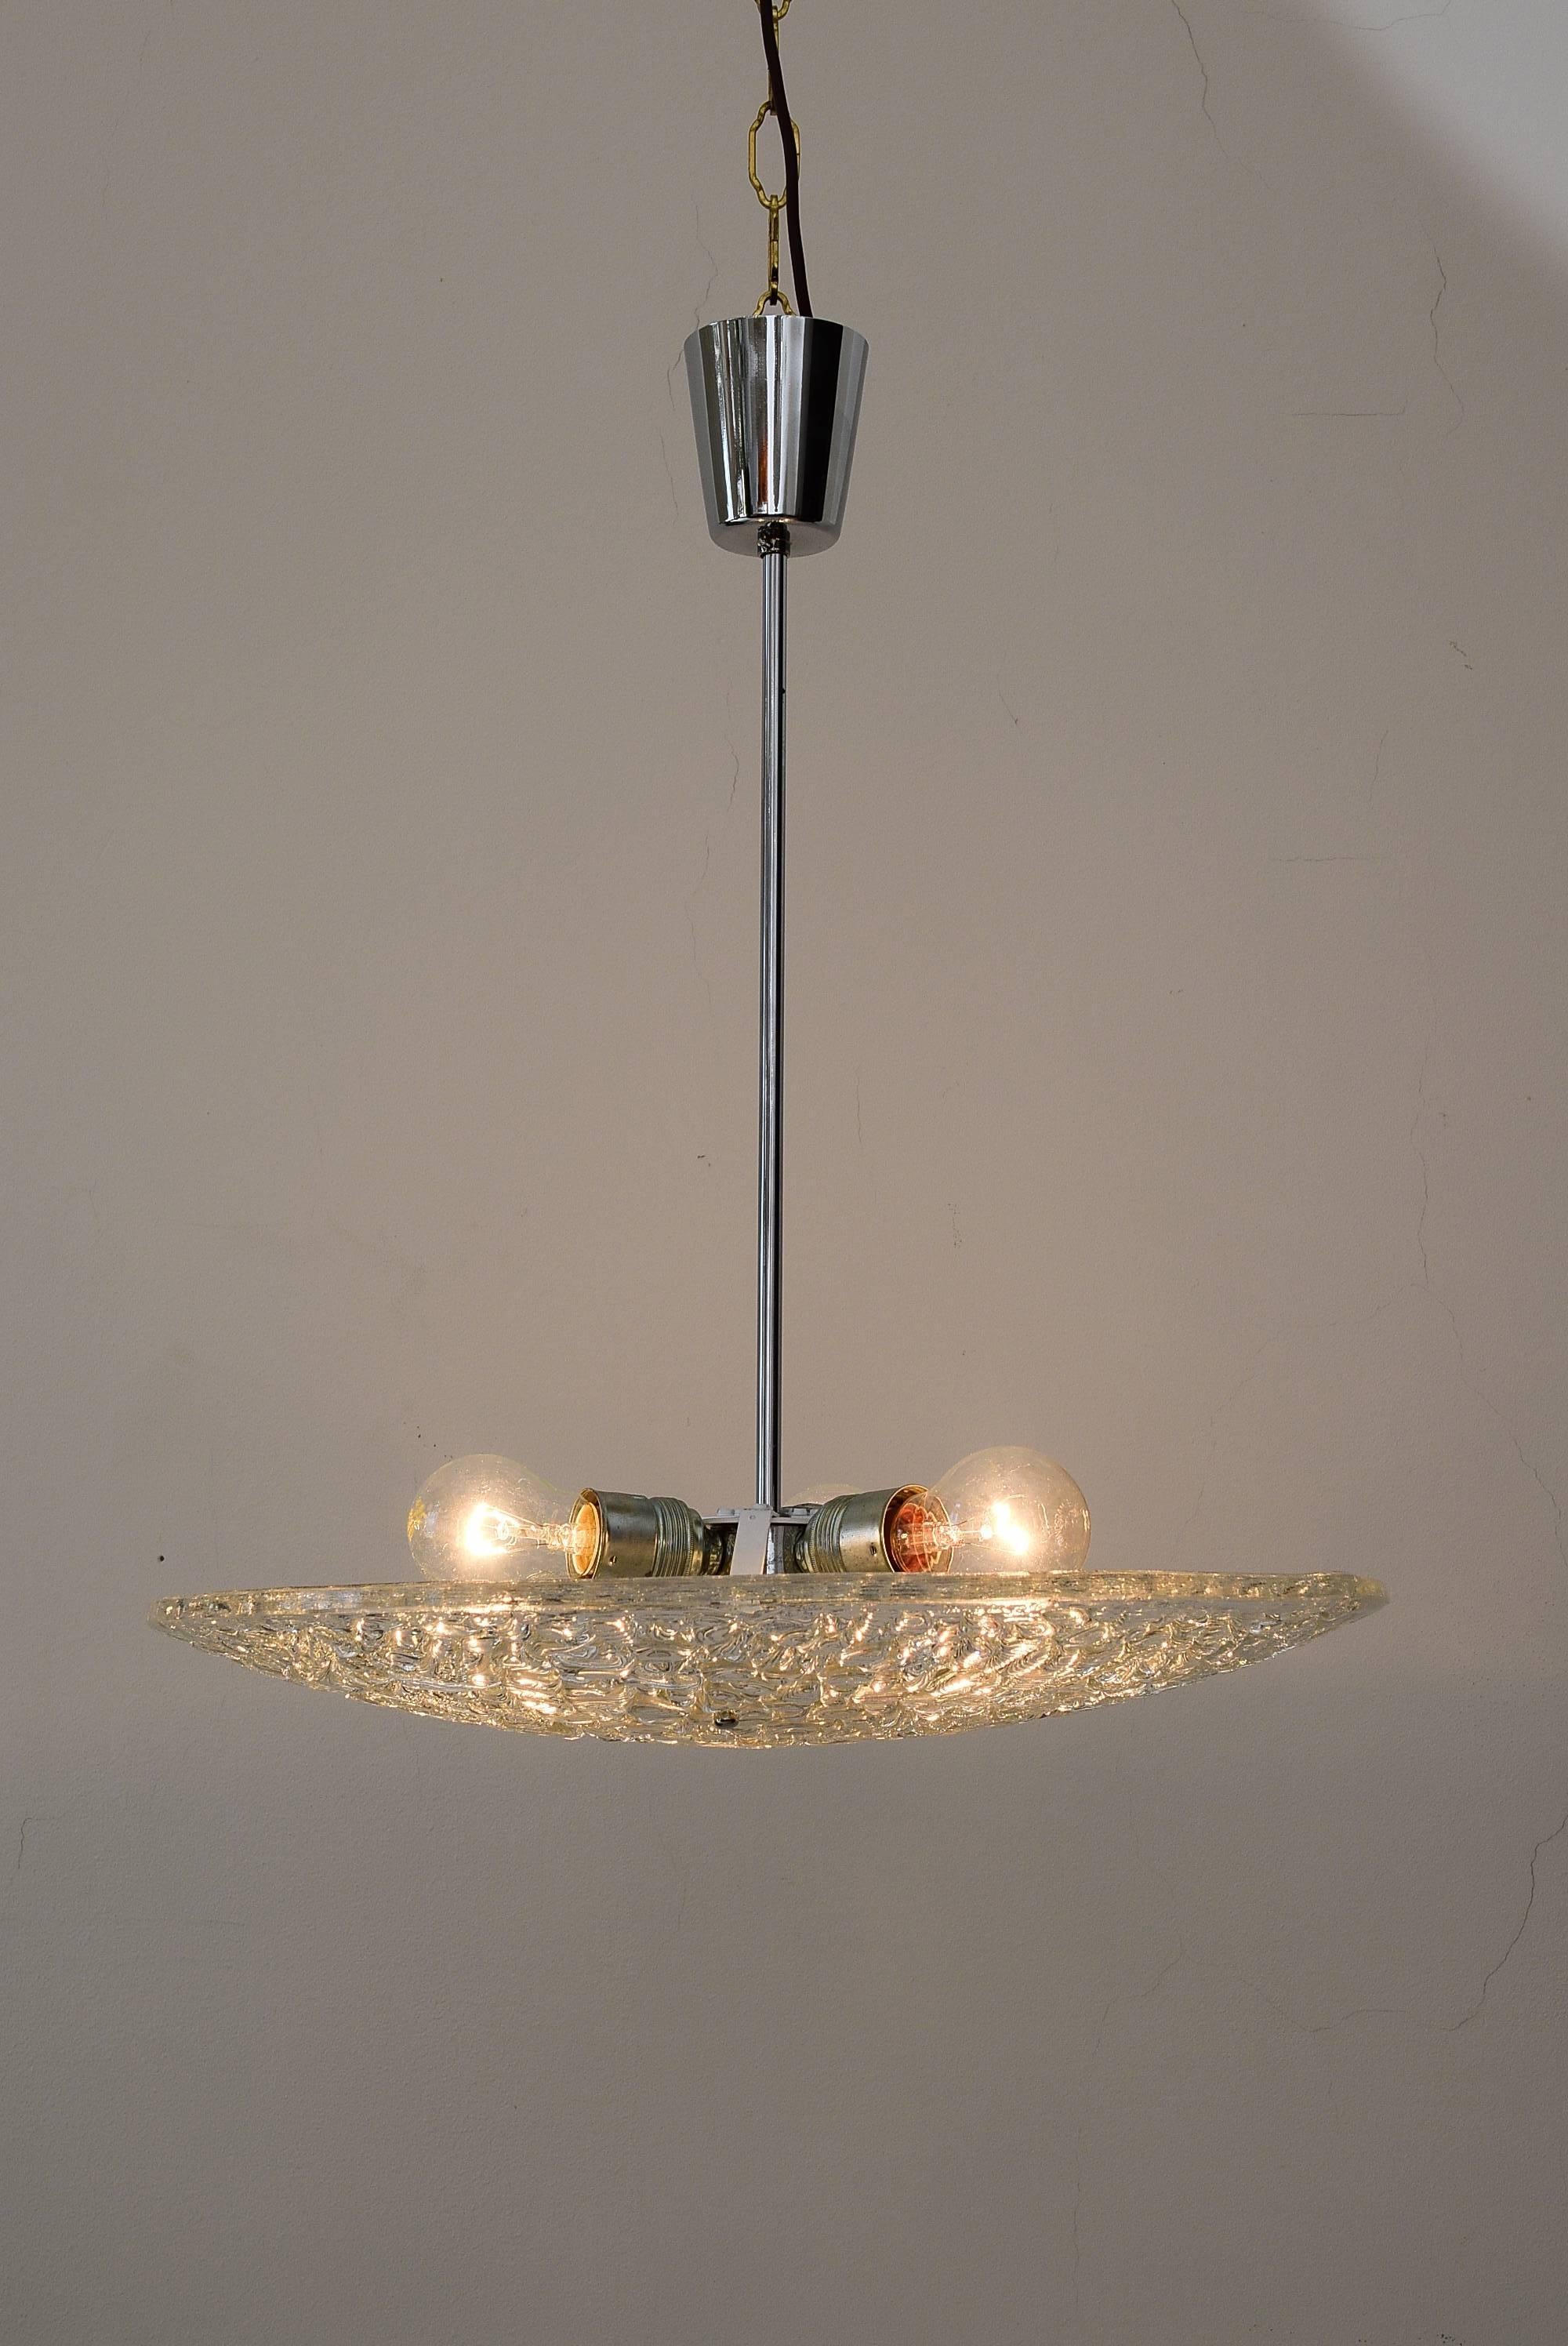 Plated Two Kalmar Lamps with Textured Glass, Vienna, 1950s For Sale